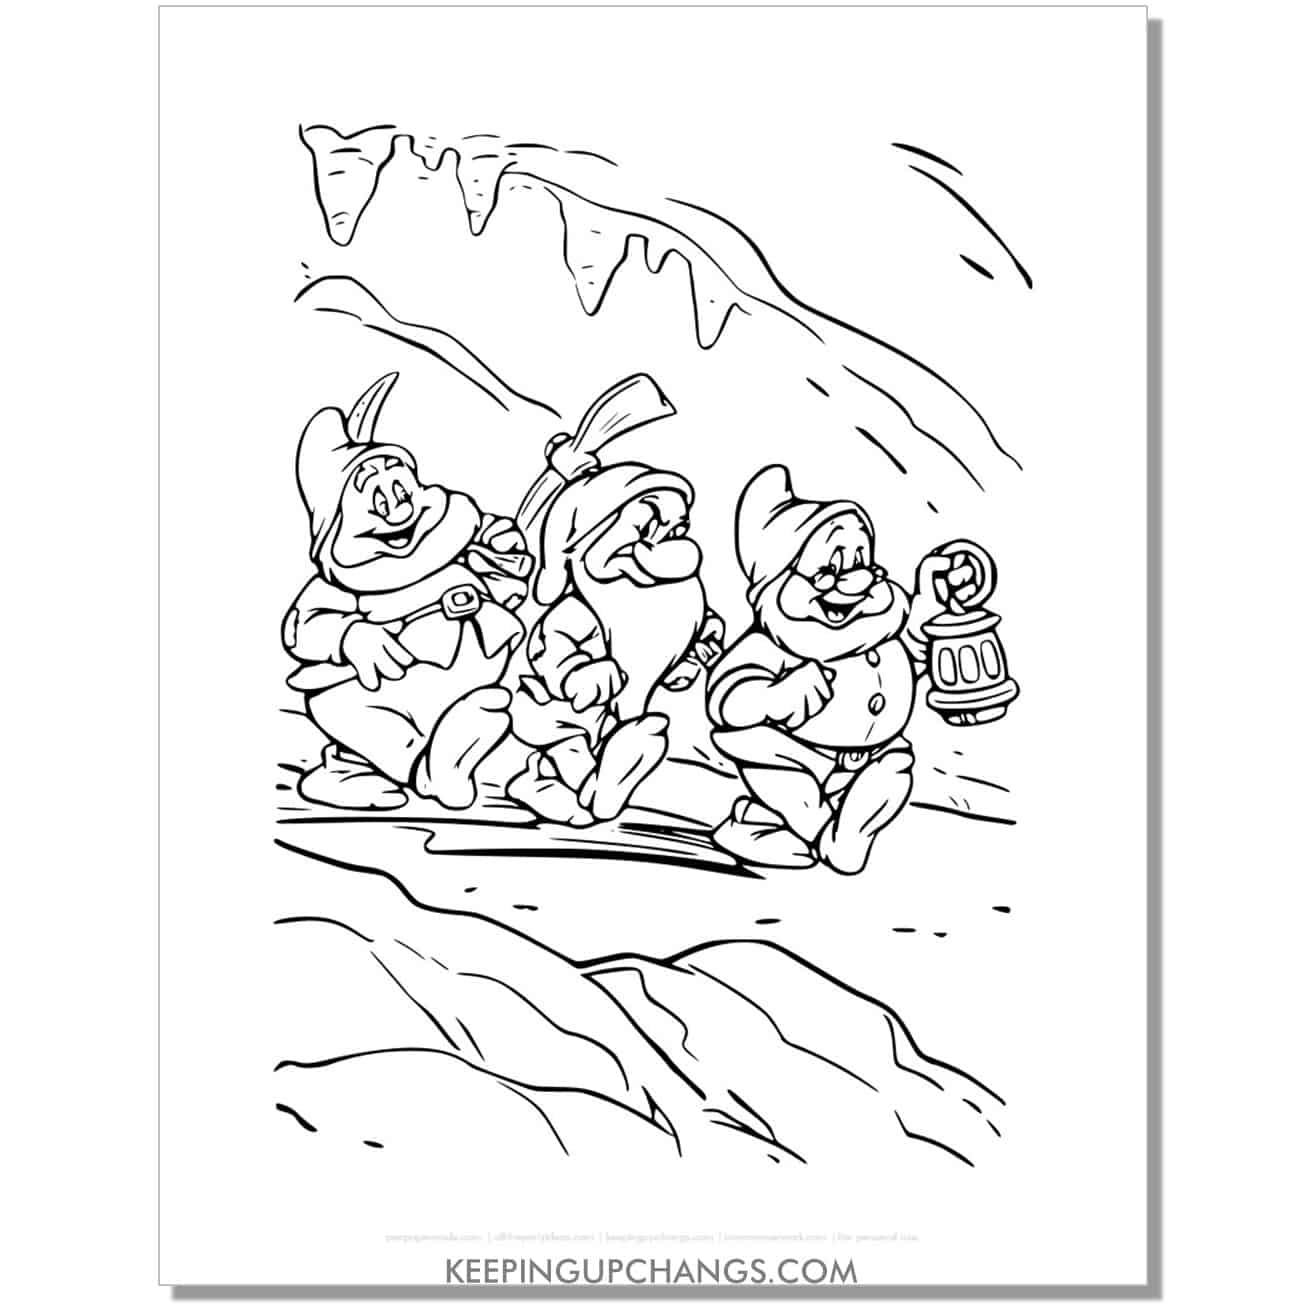 snow white dwarfs in mine coloring page, sheet.